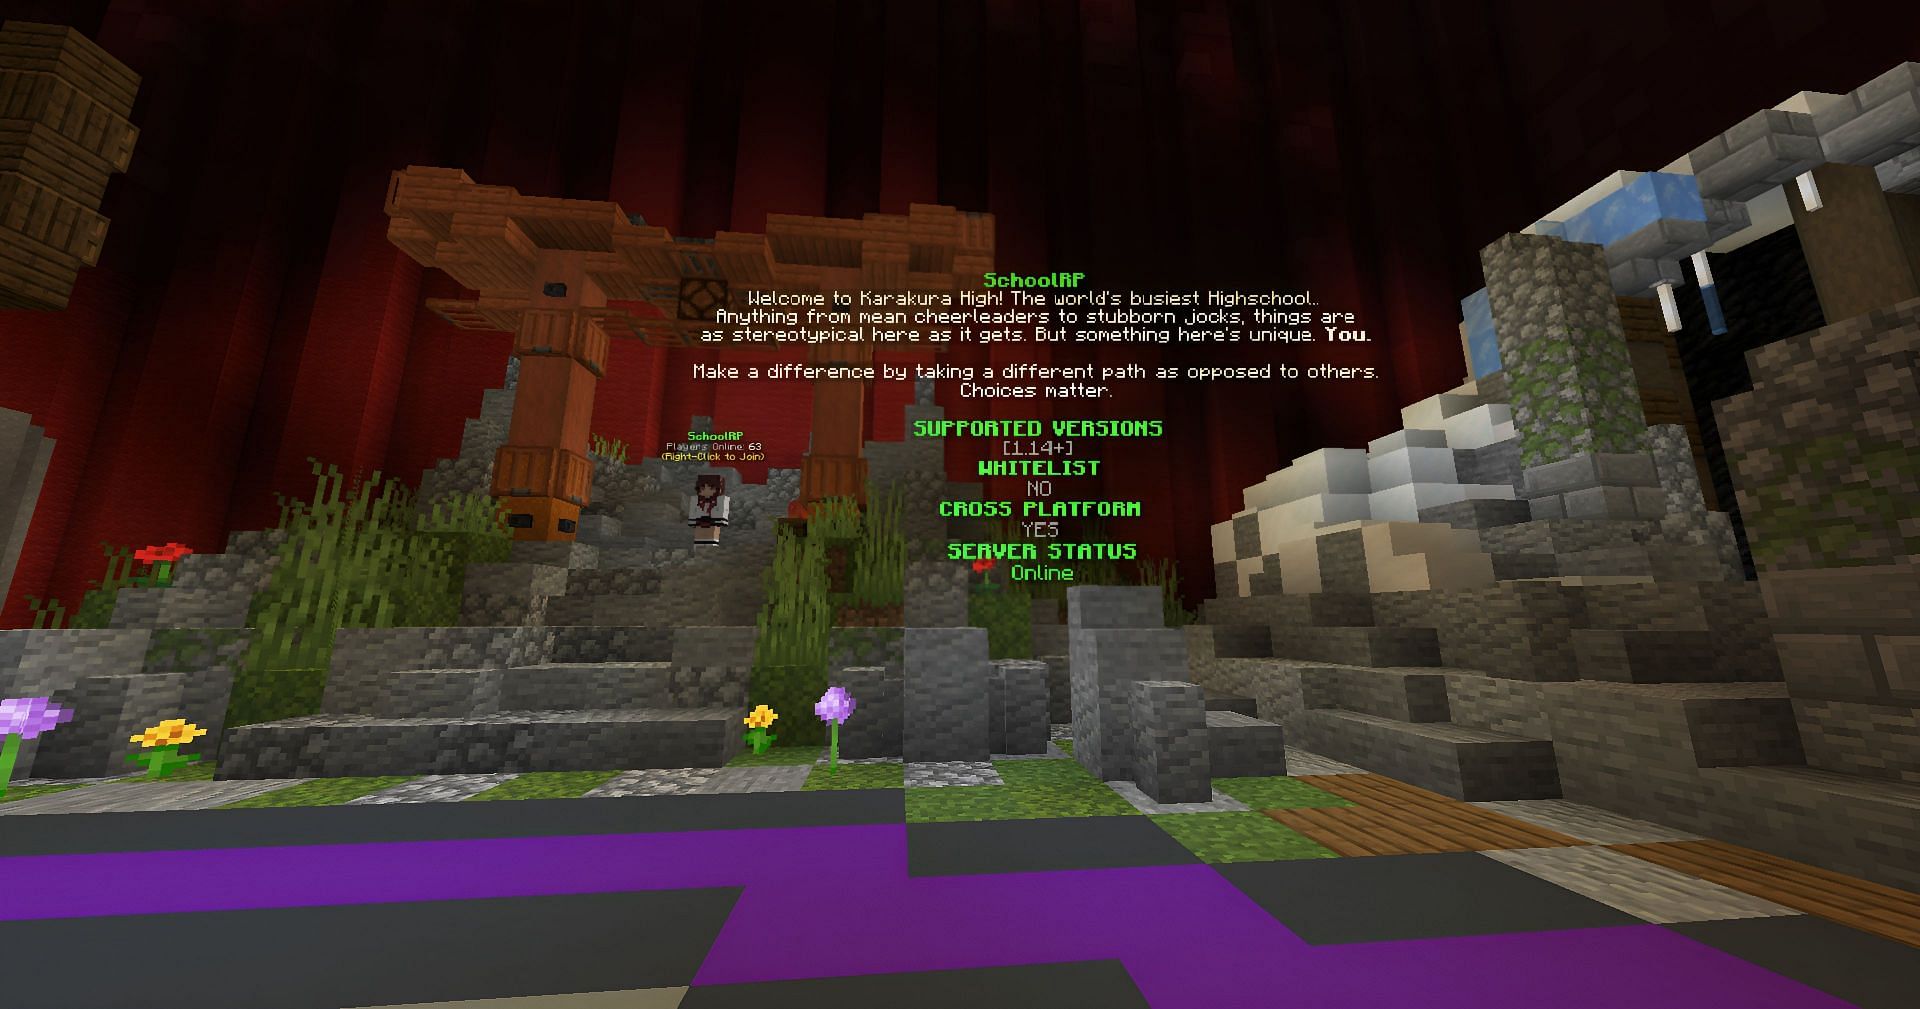 Roleplay Hub is the most popular roleplay server (Image via Mojang)